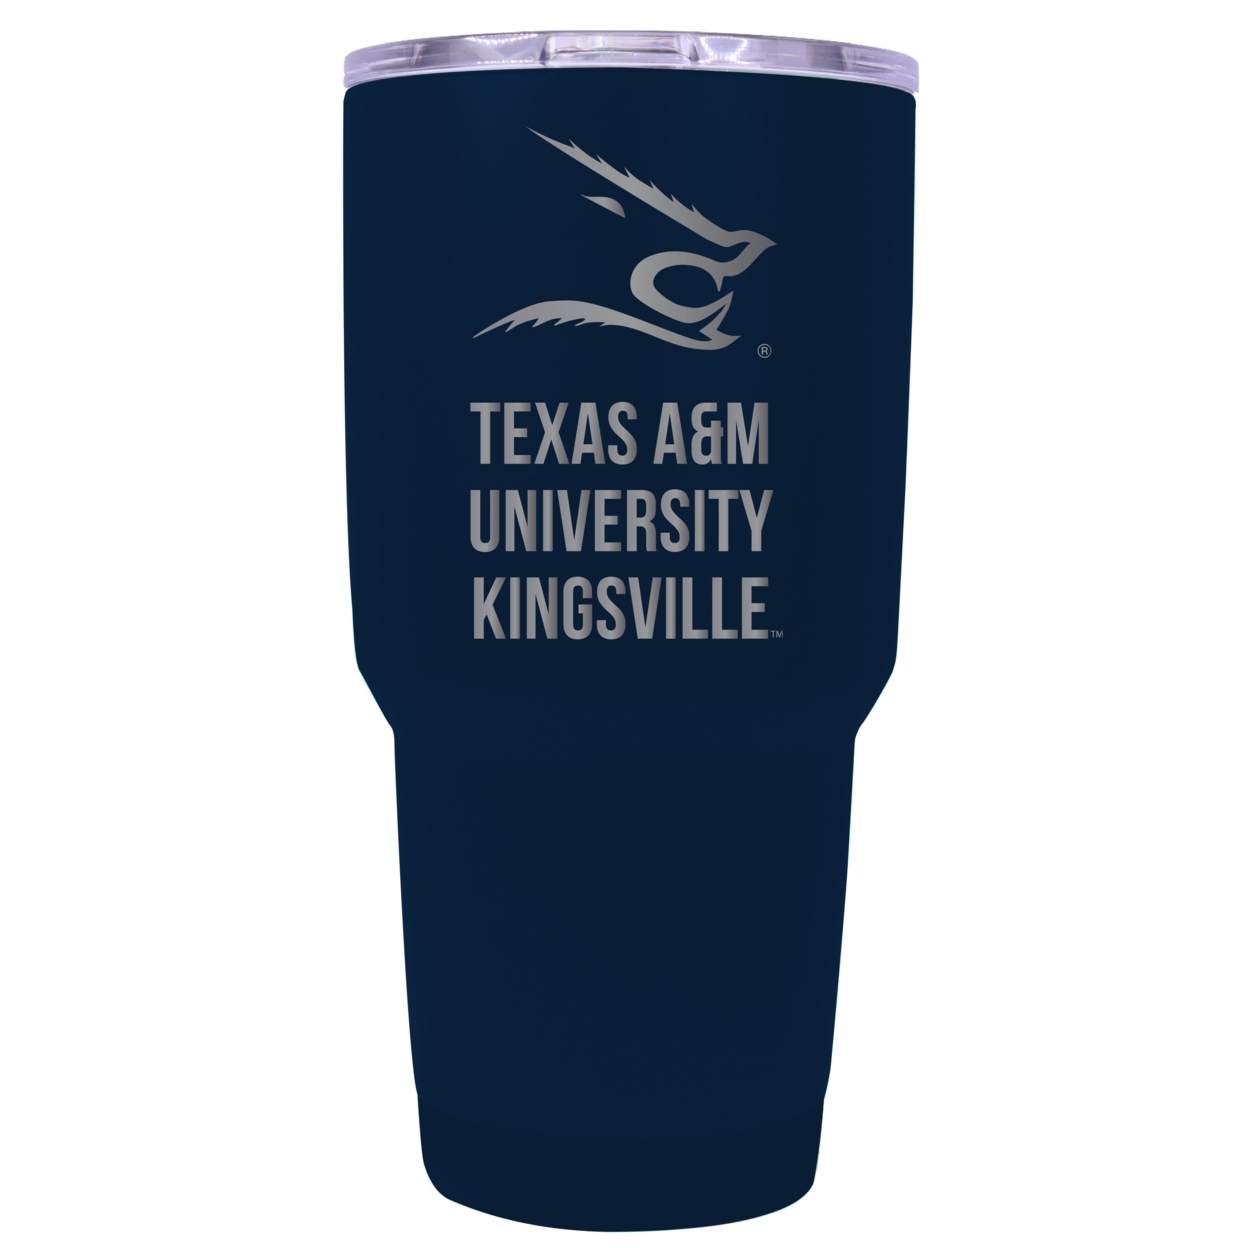 Texas A&M Kingsville Javelinas 24 Oz Laser Engraved Stainless Steel Insulated Tumbler - Choose Your Color. - Seafoam